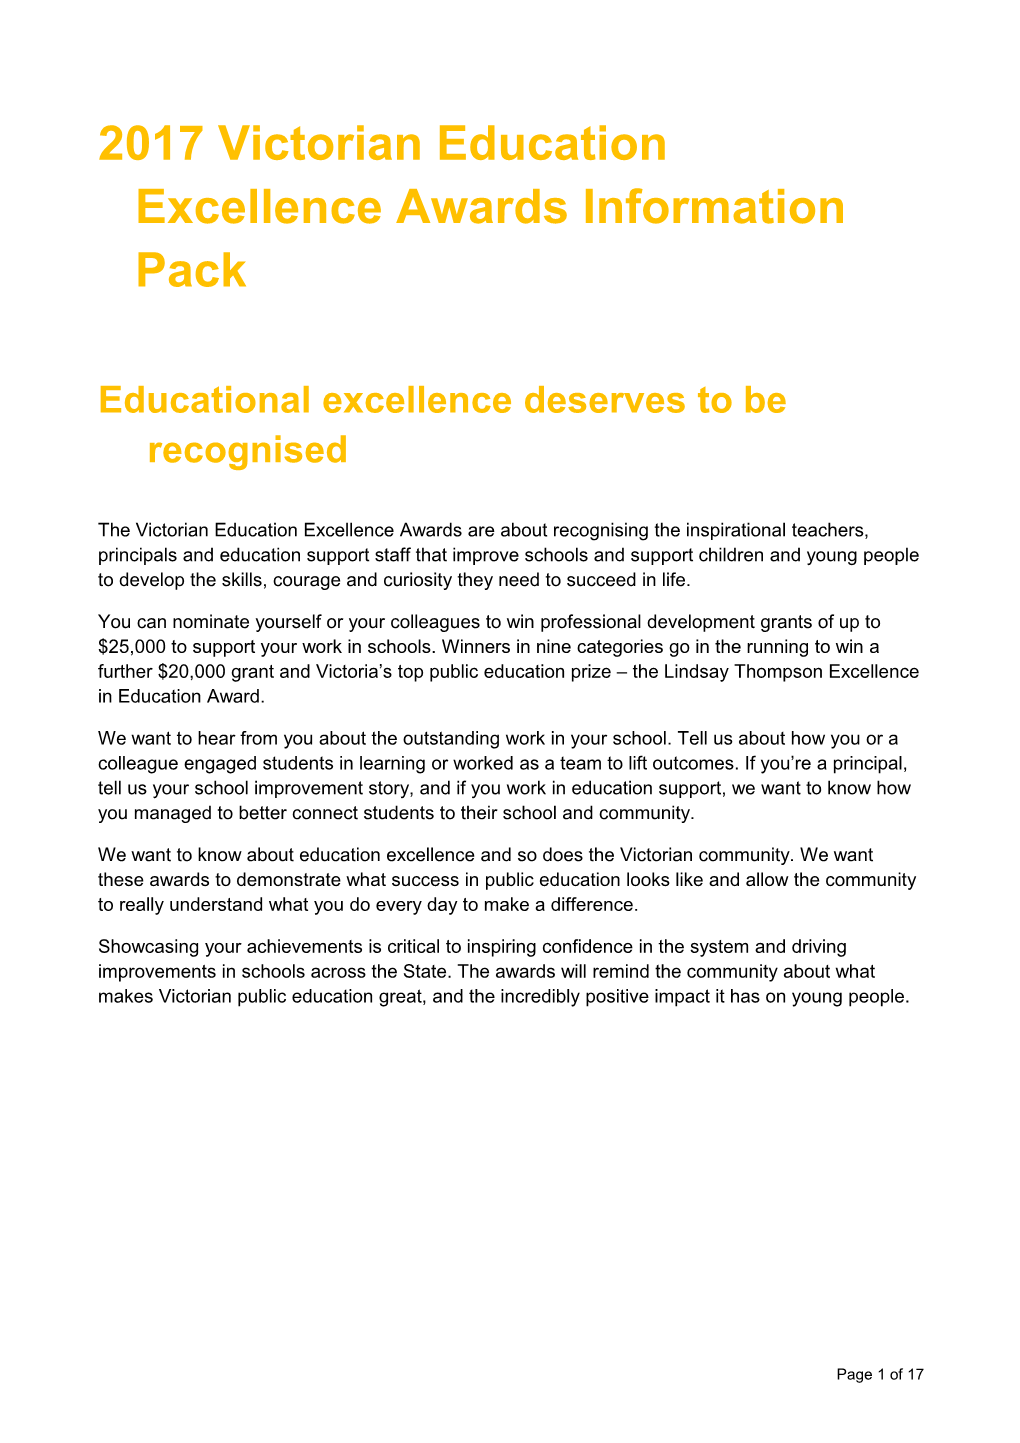 2016 Victorian Education Excellence Awards Information Pack